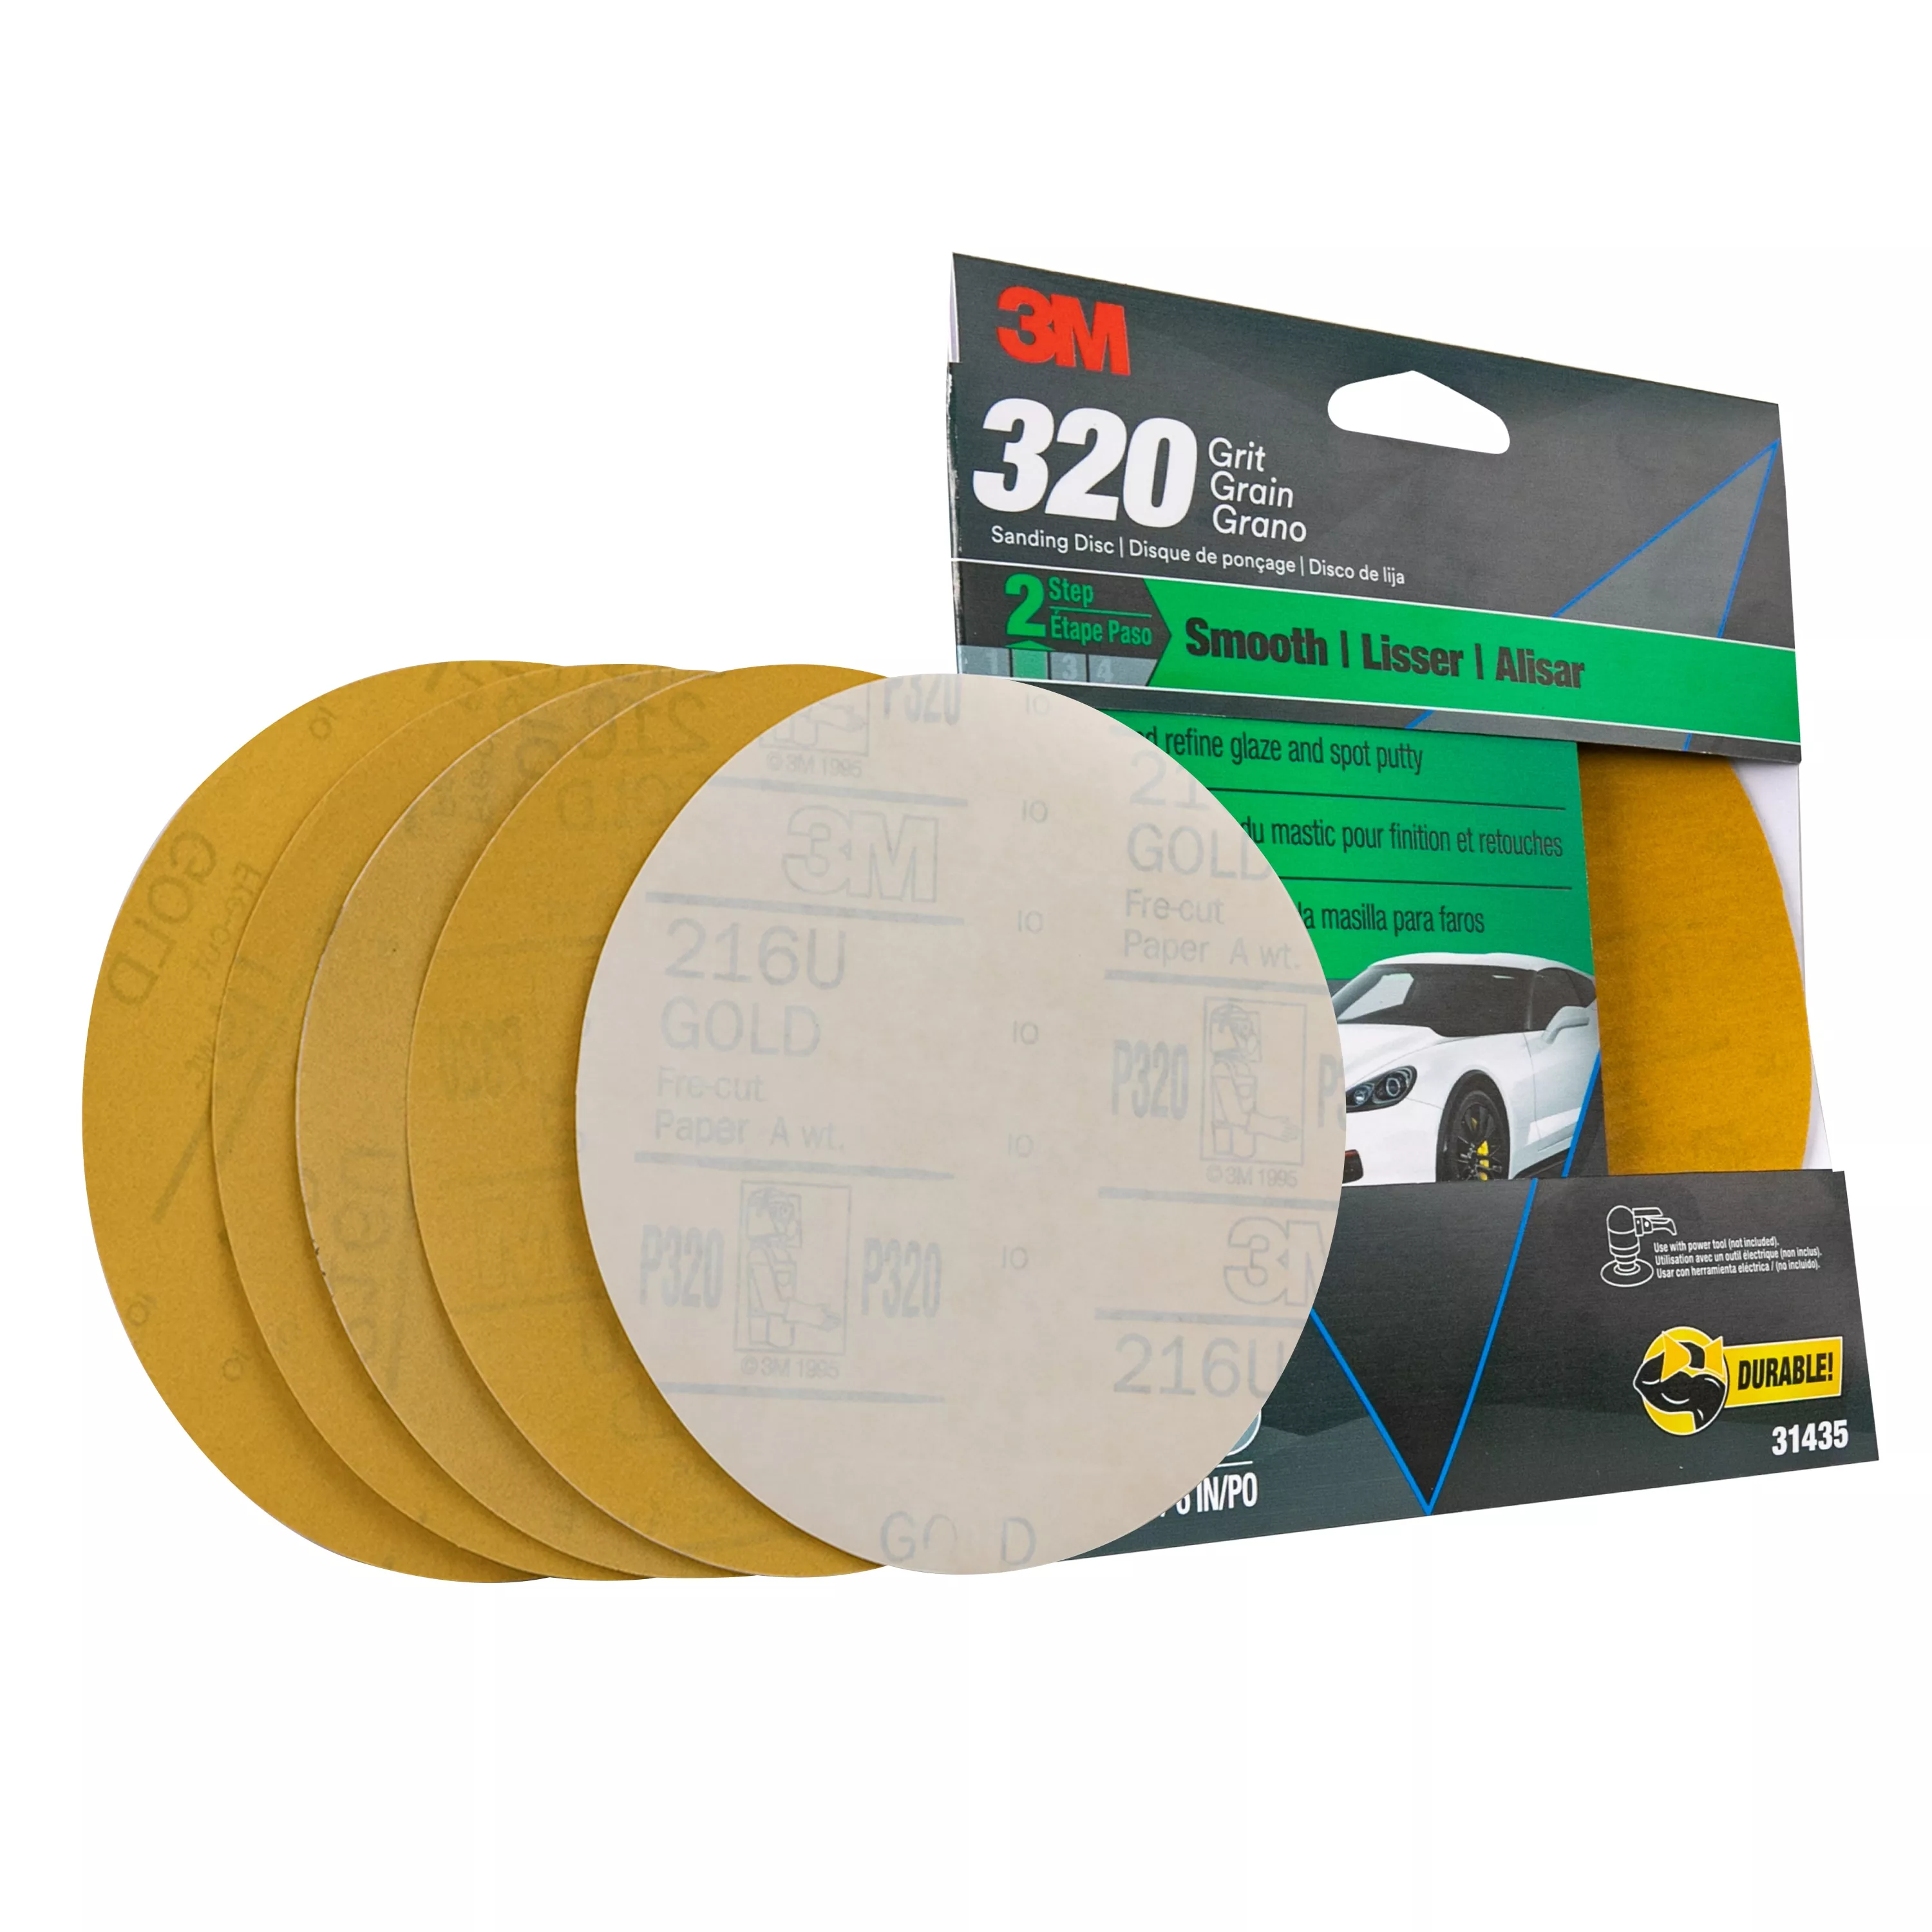 Product Number 31435 | 3M™ Sanding Discs with Stikit™ Attachment